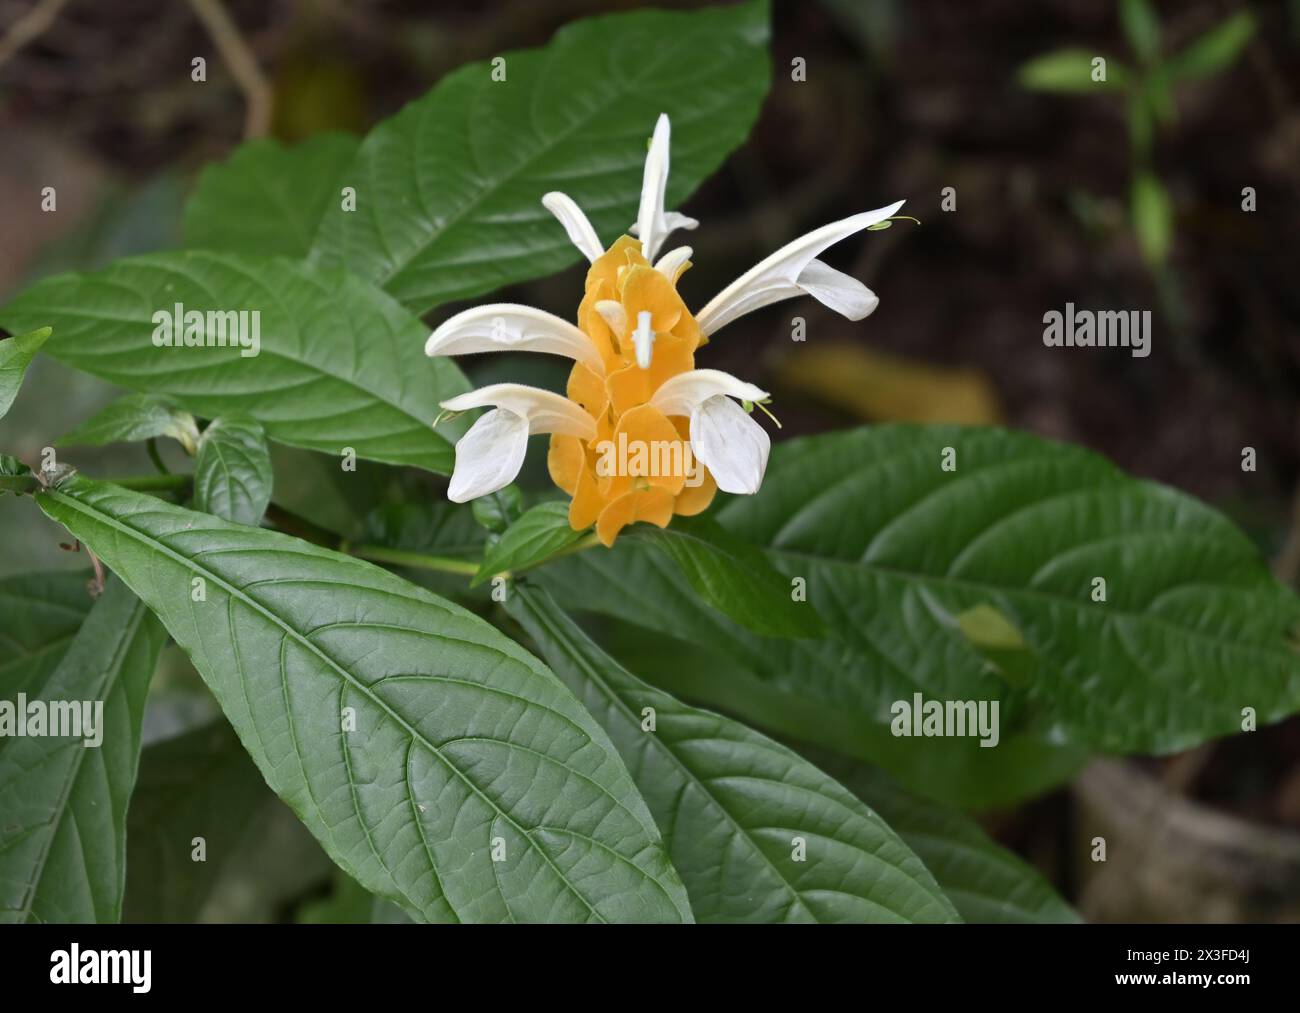 View of a small flower inflorescence on a golden shrimp plant (Pachystachys lutea) with emerging flowers Stock Photo